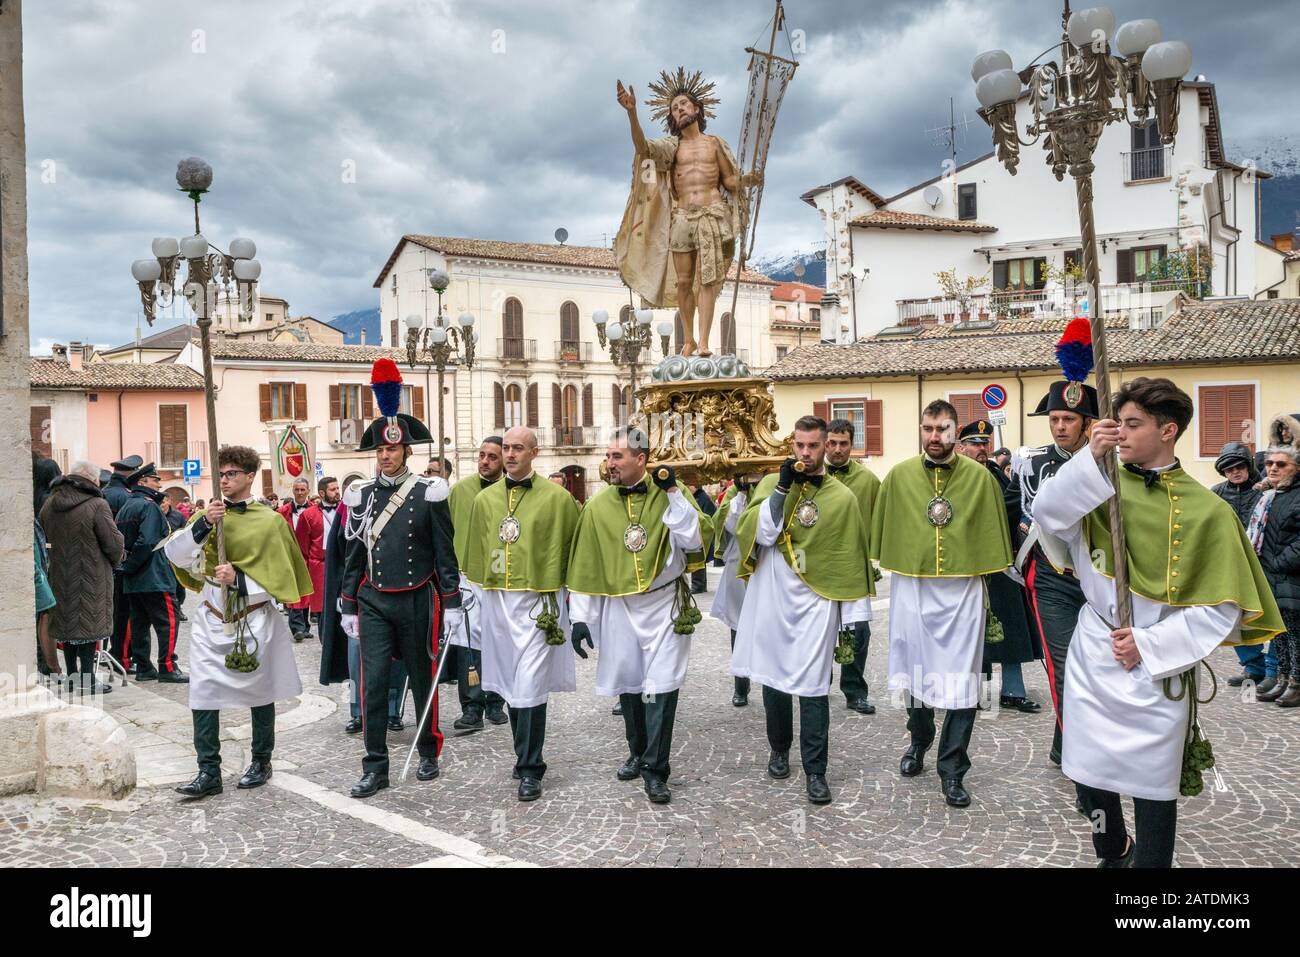 Members of Confraternity of Madonna di Loreto, carrying figure of Jesus, at Madonna che Scappa procession on Easter Sunday in Sulmona, Abruzzo, Italy Stock Photo